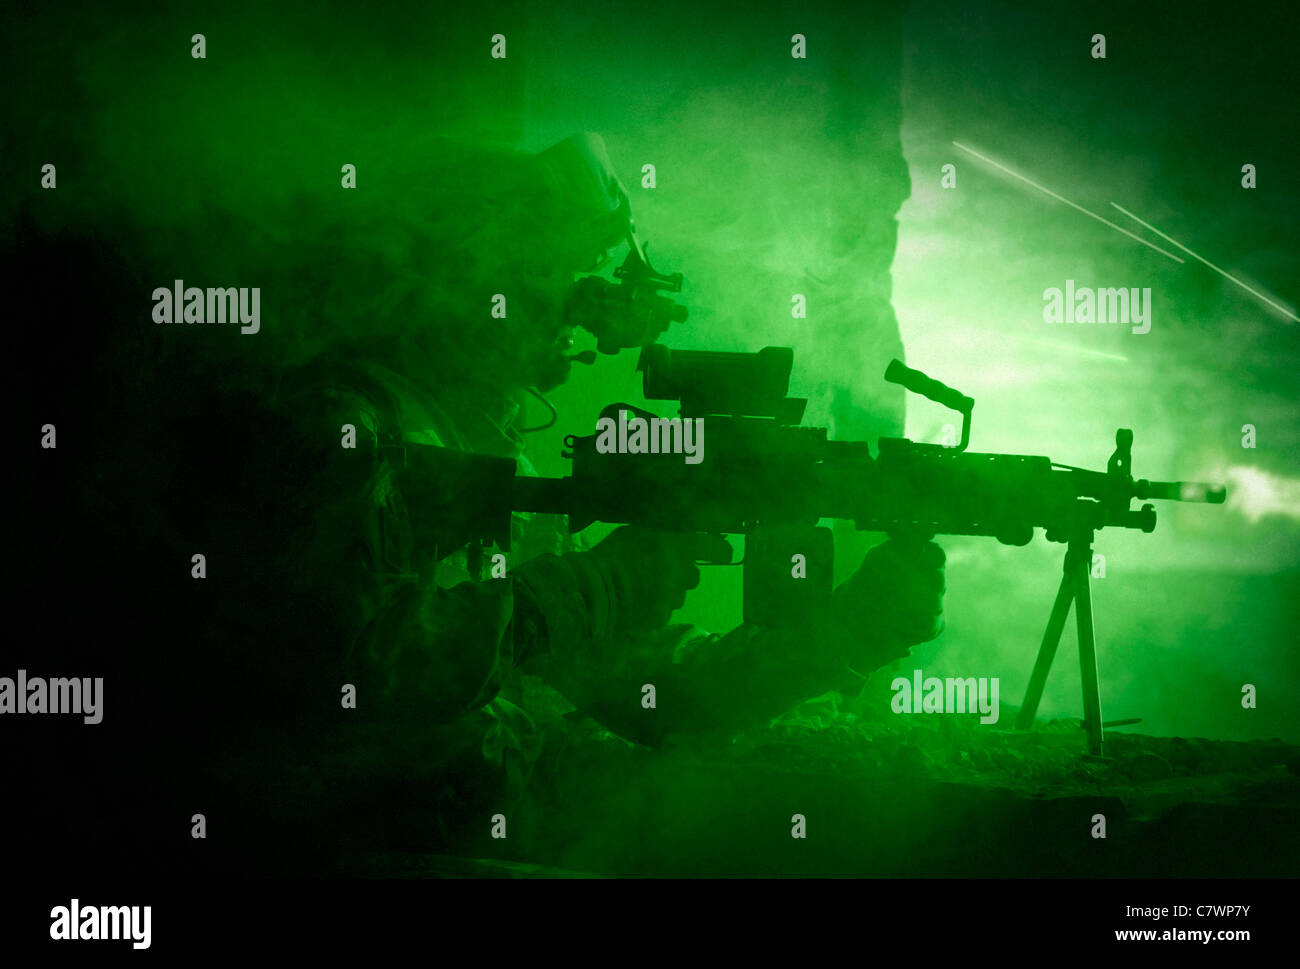 Night vision view of a U.S. Army Ranger in Afghanistan combat scene. Stock Photo